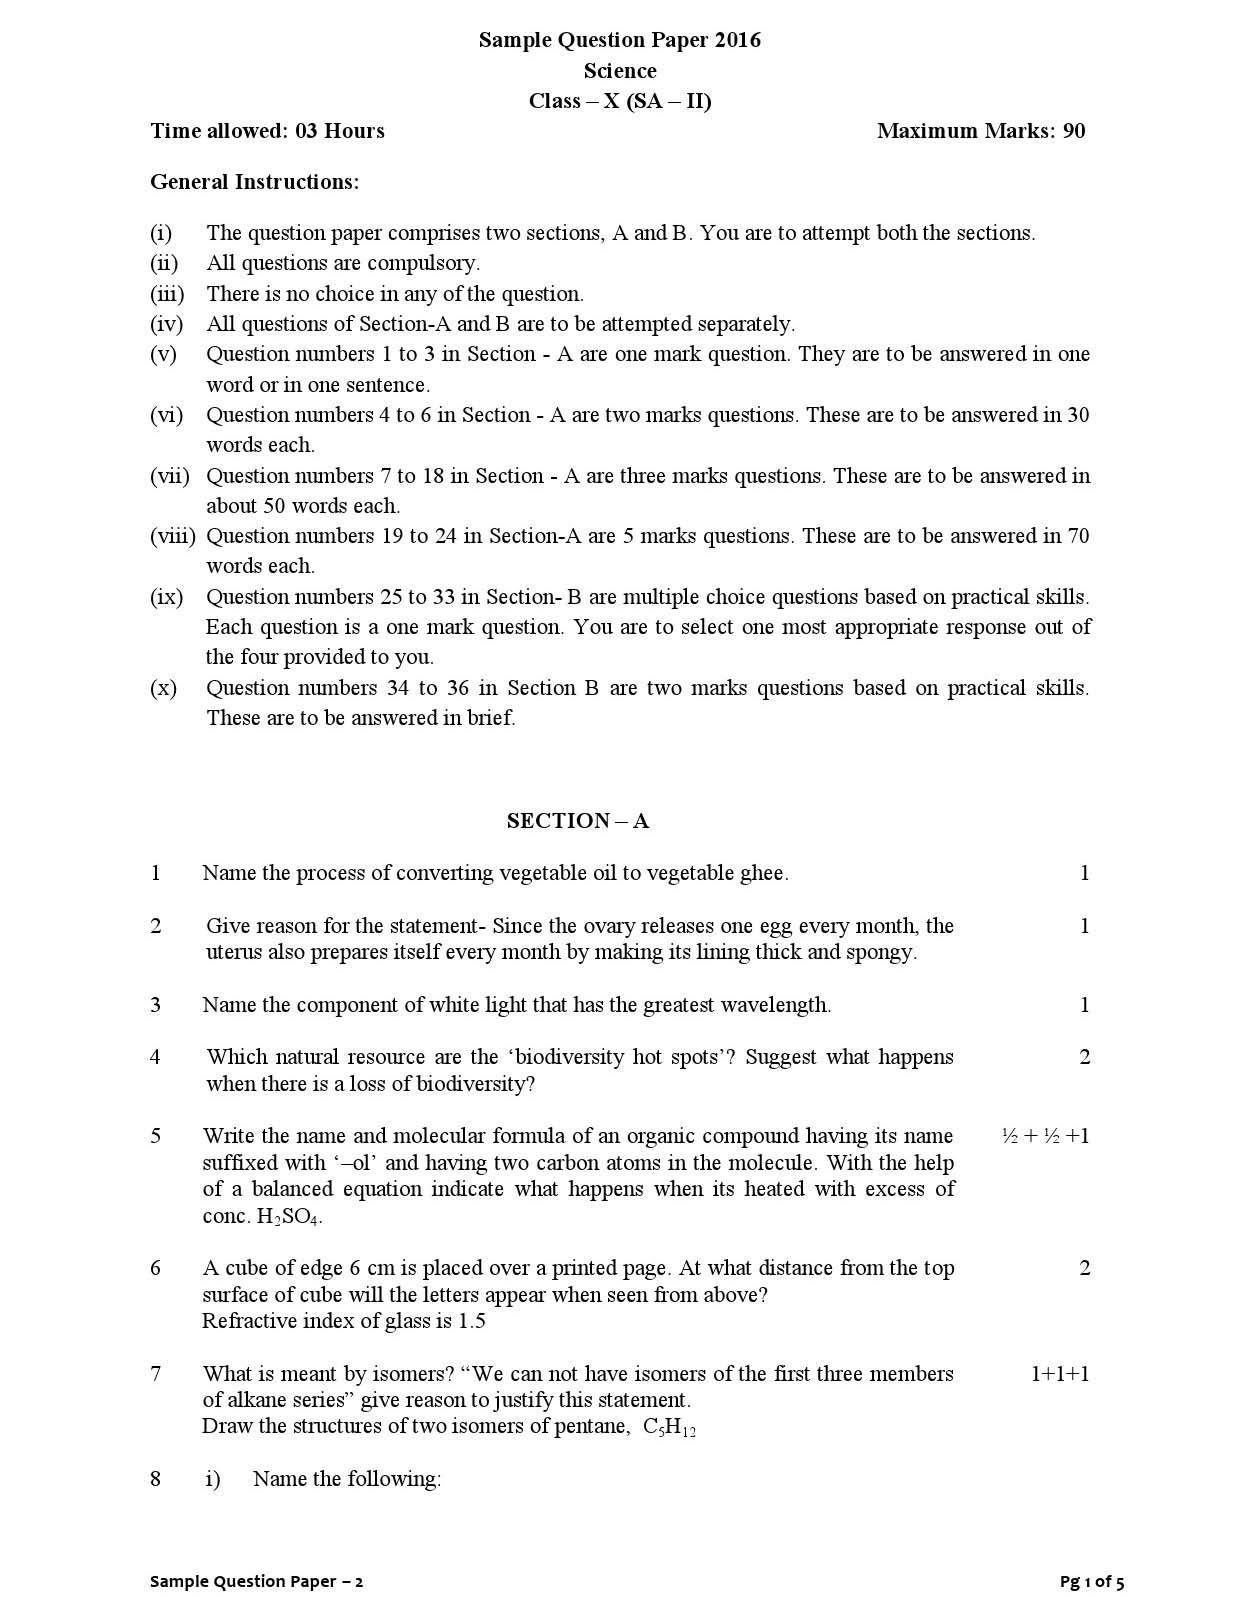 Science CBSE Class X Sample Question Paper 2015 16 - Image 1